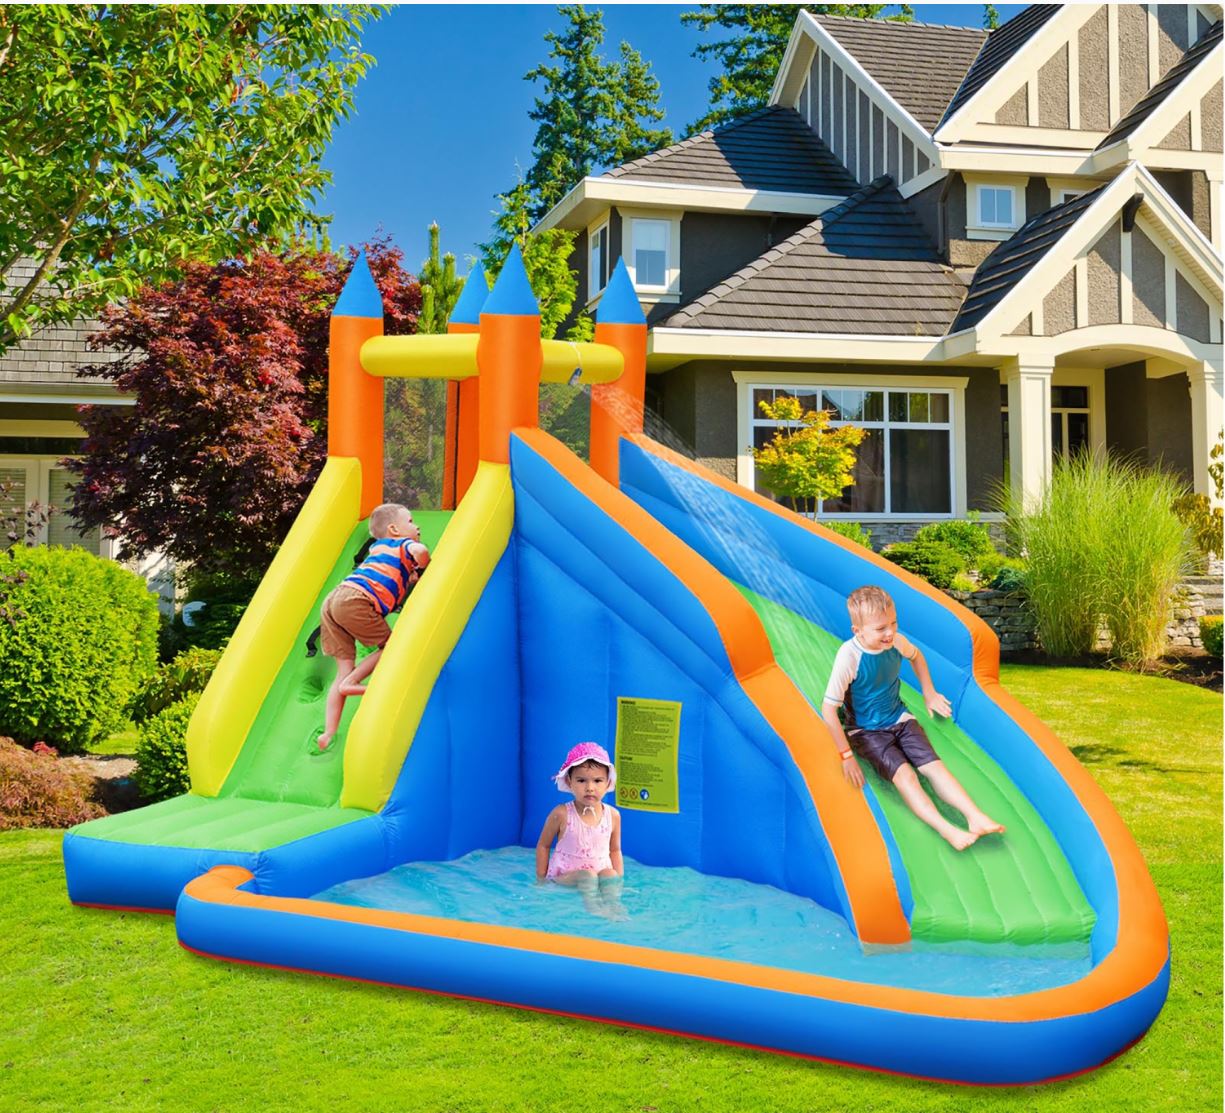 Kids playing on an inflatable water slide in a backyard.